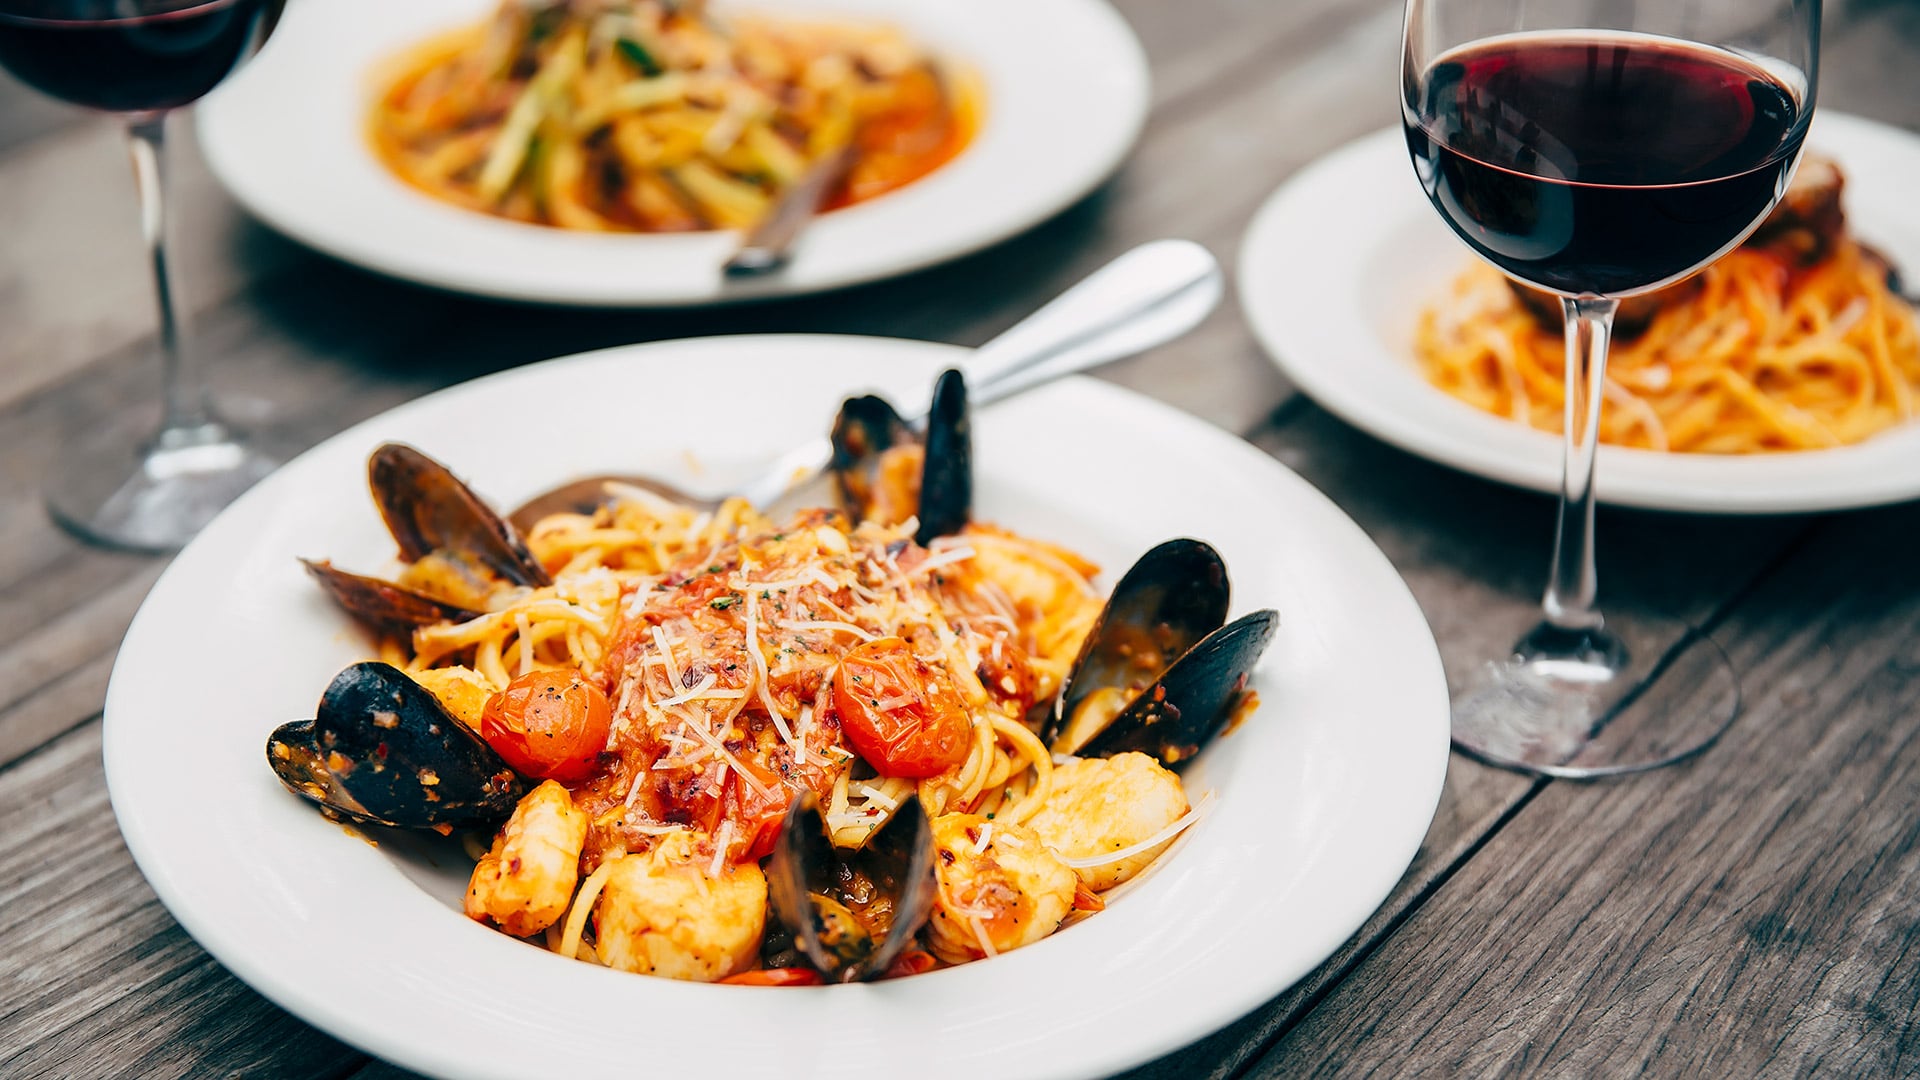 Seafood pasta and red wine